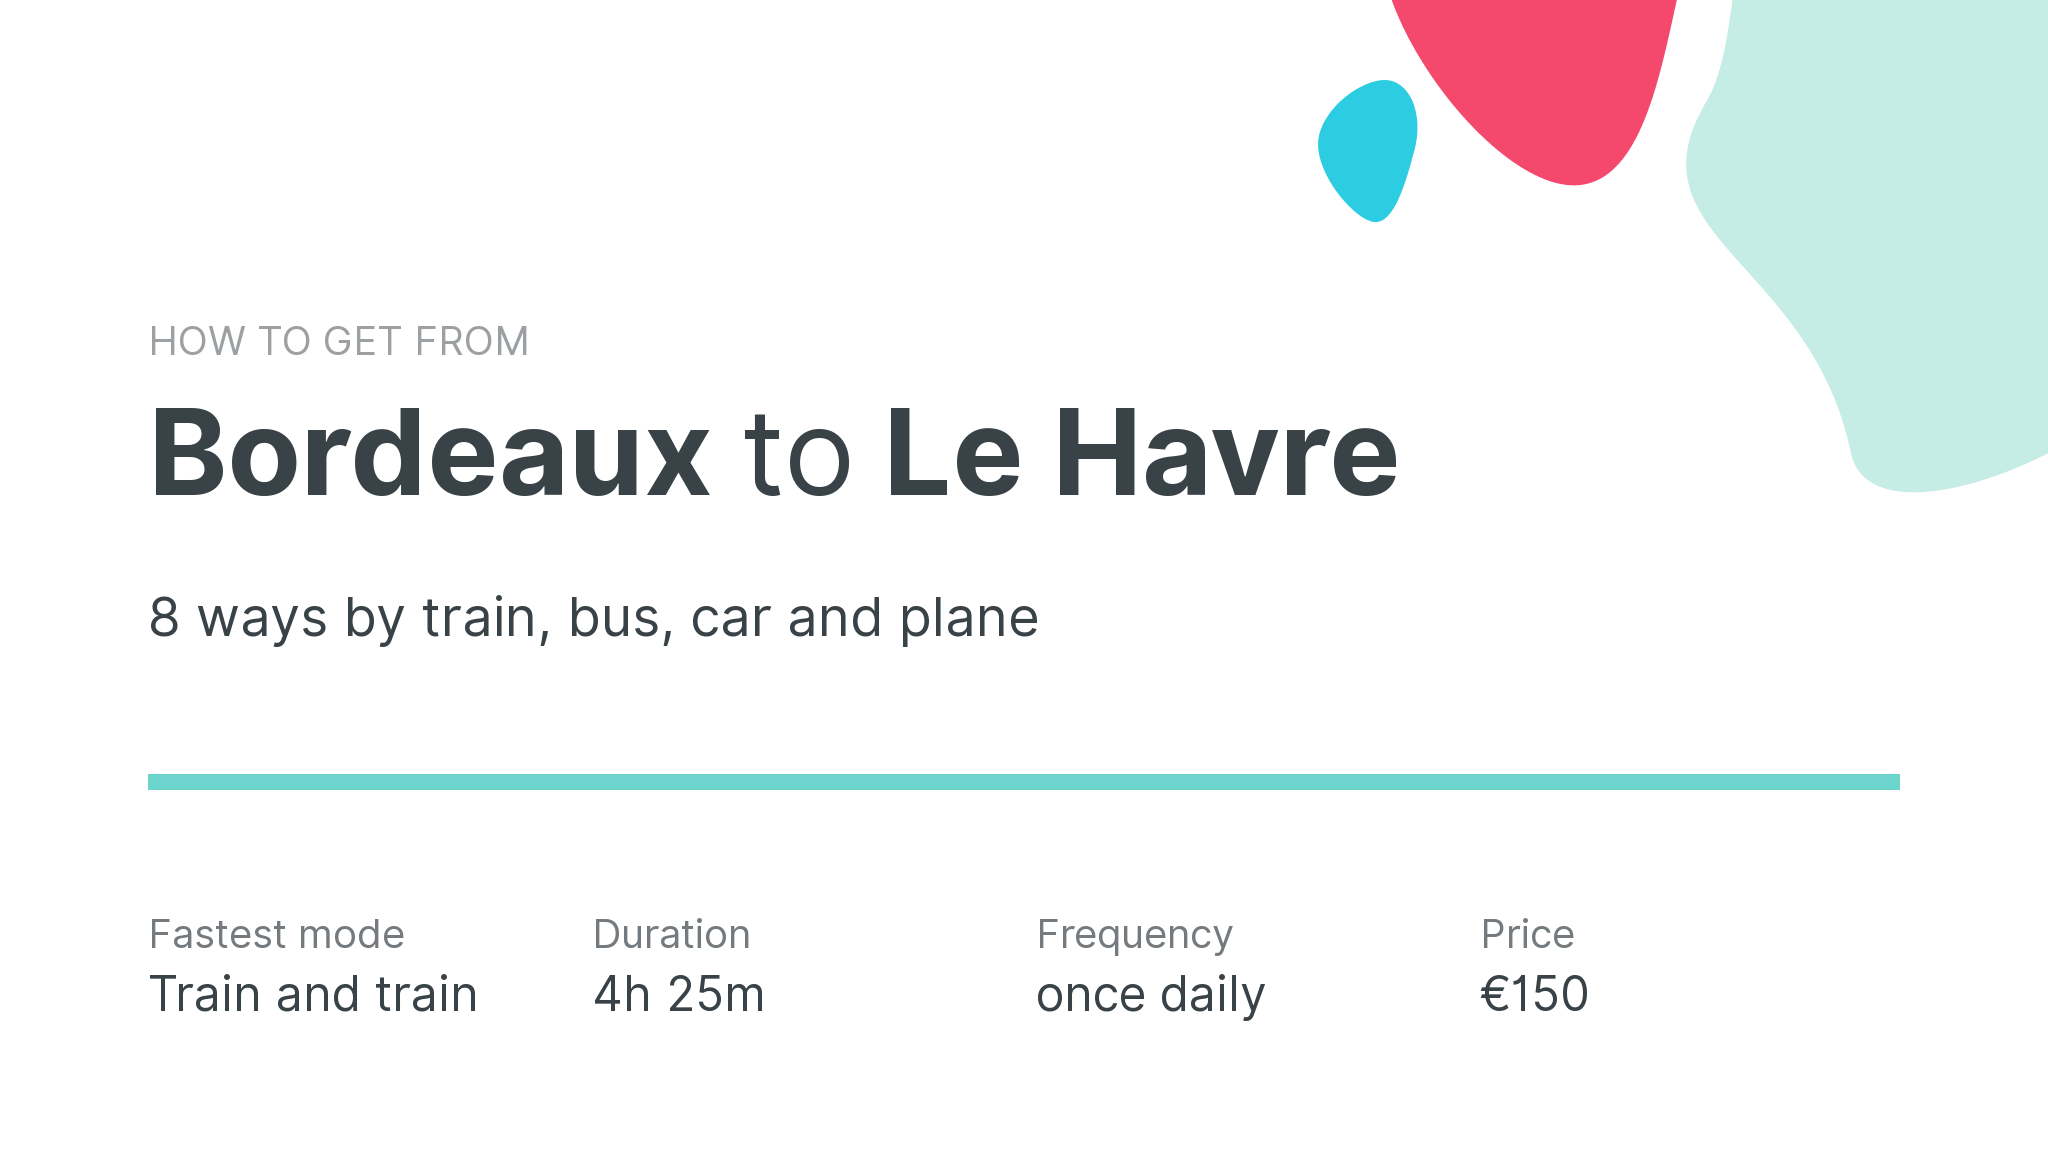 How do I get from Bordeaux to Le Havre